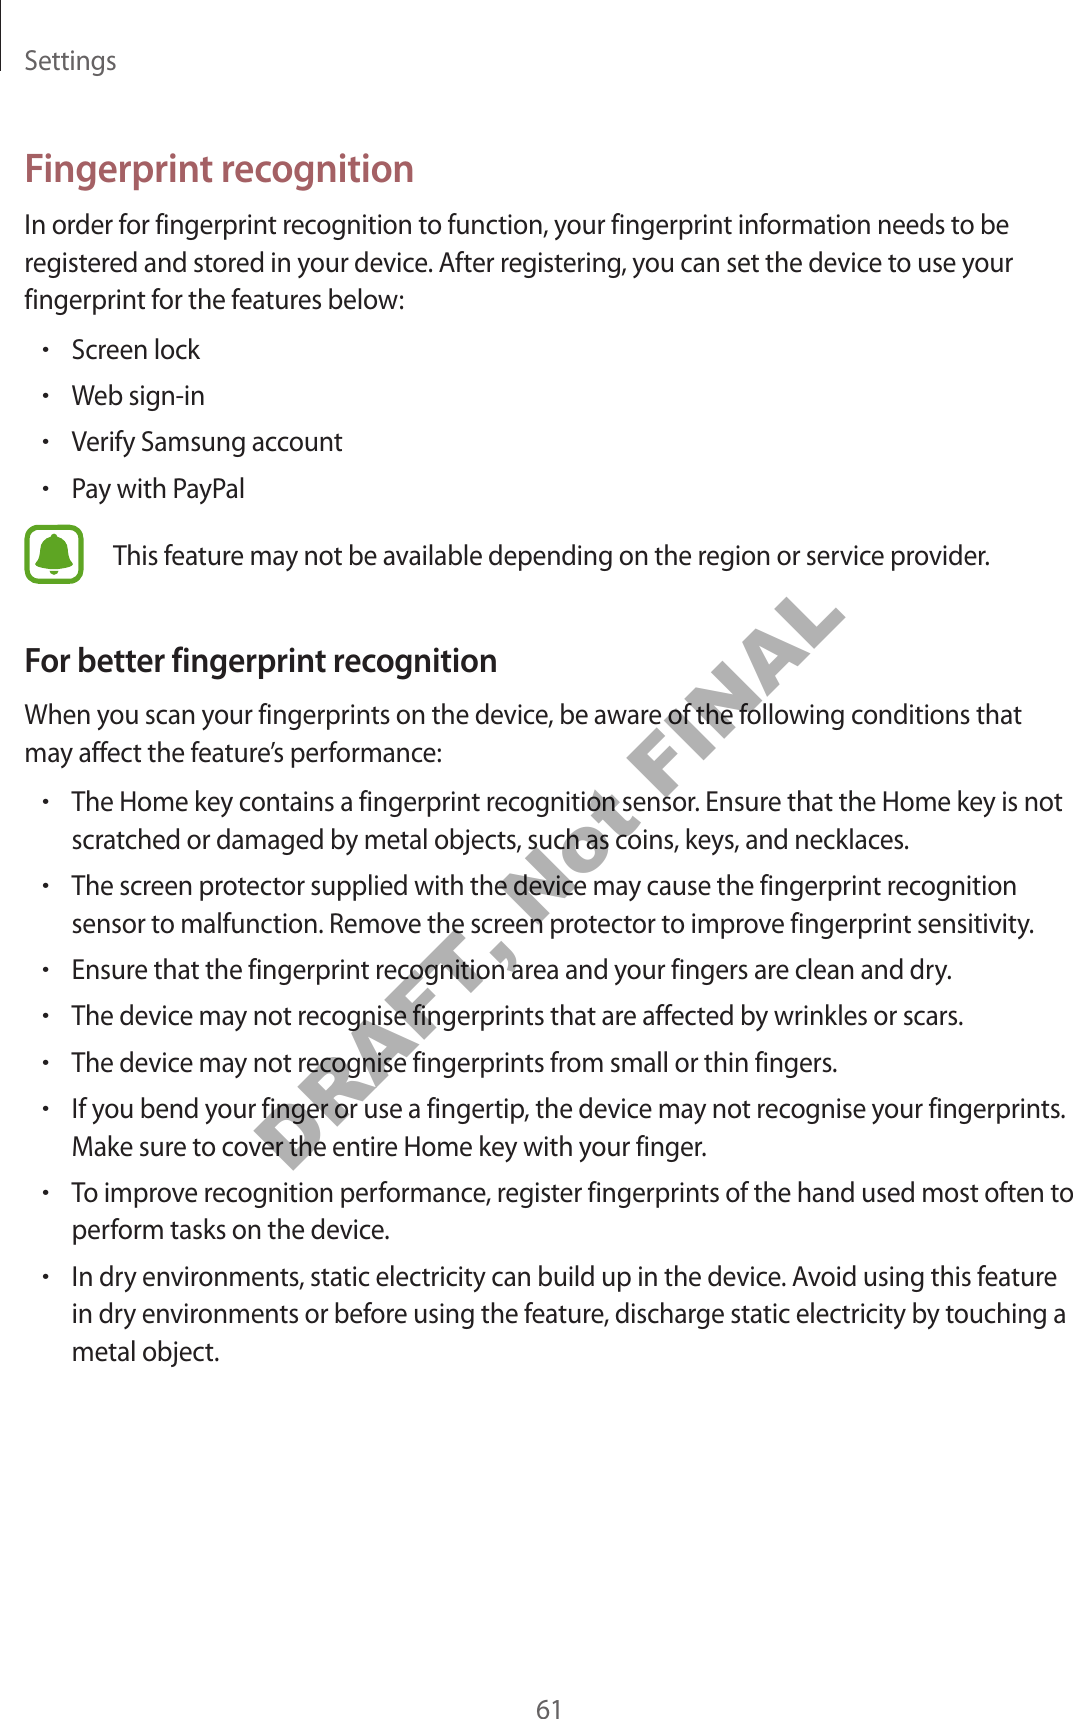 Settings61F ingerprin t r ec ognitionIn order for fingerprint r ecog nition to function, your fingerprint inf ormation needs t o be regist er ed and st or ed in y our device . A fter r egist ering , y ou can set the device t o use y our fingerprint for the f eatur es belo w:•Screen lock•Web sign-in•Verify Samsung account•P a y with PayPalThis f eatur e ma y not be a vailable depending on the r eg ion or service provider.For better fingerprint r ec ognitionWhen you scan y our fingerprints on the device, be aware of the f ollo wing c onditions that may aff ect the featur e’s performance:•The Home key contains a fingerprint r ec ognition sensor. Ensure that the Home key is not scratched or damaged b y metal objects, such as coins , key s , and necklaces.•The screen pr ot ector supplied with the device ma y cause the fingerprint rec og nition sensor to malfunction. Remove the screen pr ot ector to impr o v e fingerprint sensitivity.•Ensure that the fingerprint r ecog nition ar ea and y our fingers ar e clean and dry .•The device ma y not r ecog nise fingerprints that ar e aff ected by wrinkles or scars.•The device ma y not r ecog nise fingerprints fr om small or thin fingers .•If you bend your finger or use a fingertip, the device ma y not r ec ognise y our fingerprints . Make sure to co v er the entir e Home key with y our finger.•To improv e r ec og nition performanc e , r egist er fingerprints of the hand used most often to perform tasks on the device .•In dry environments , sta tic electricity can build up in the device. A v oid using this f ea tur e in dry envir onments or before using the featur e, discharge static electricity by touching a metal object.DRAFT, Not FINAL